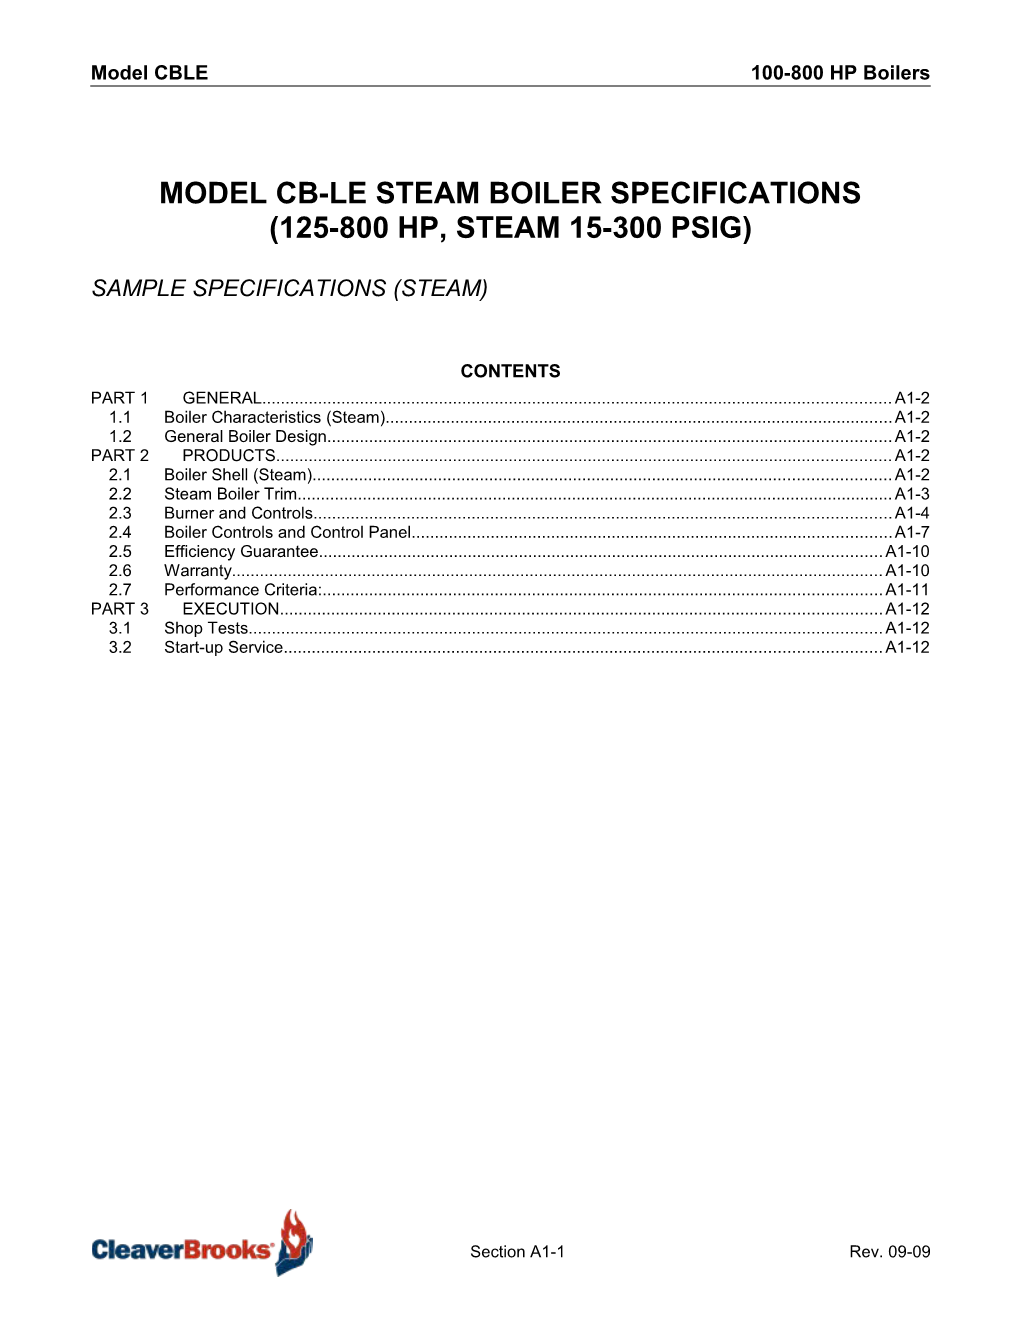 CBLE Specifications - Steam